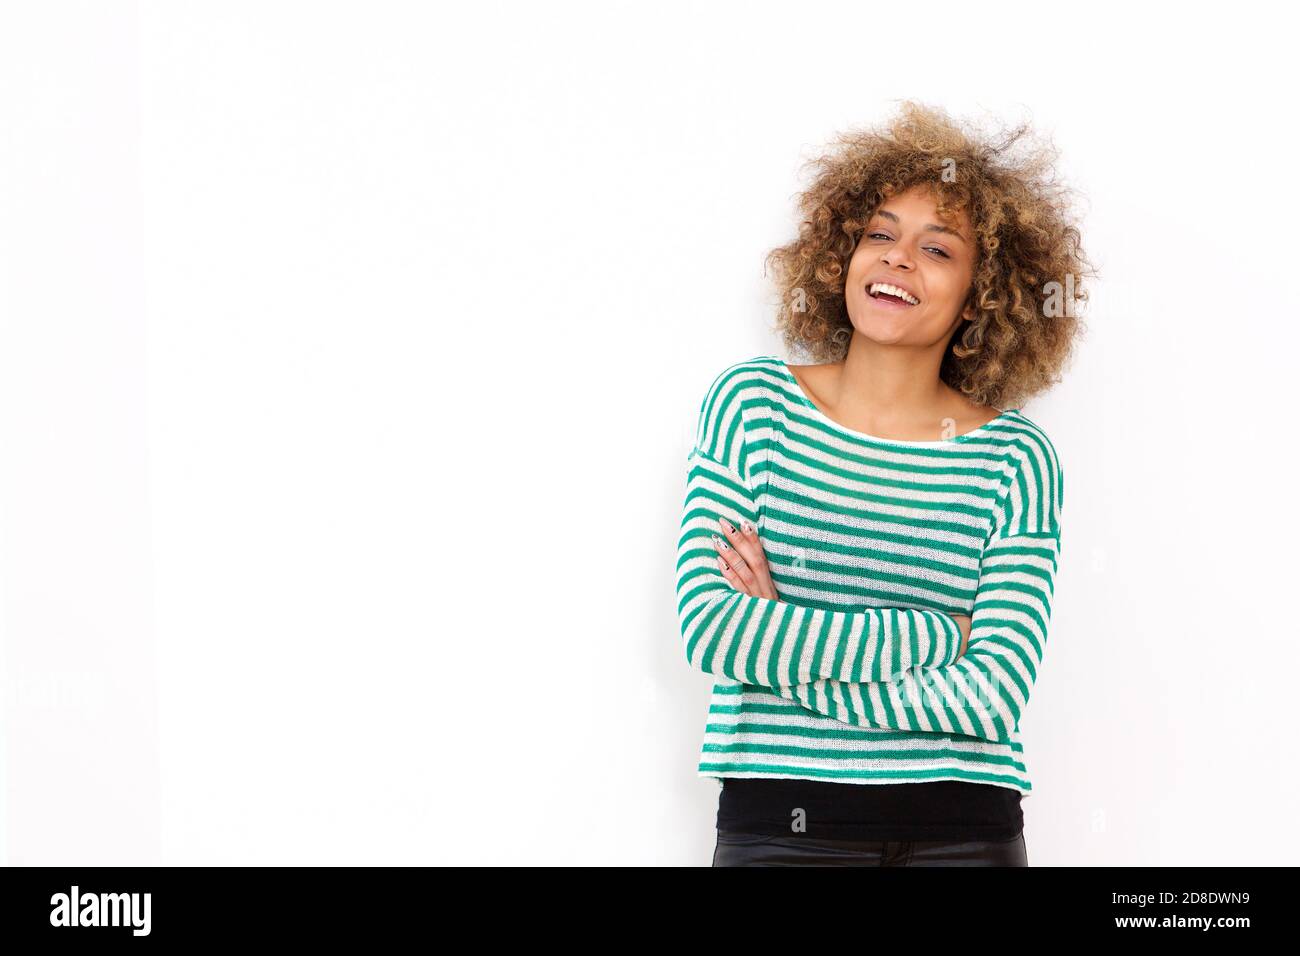 Portrait of confident young black woman smiling against white background Stock Photo